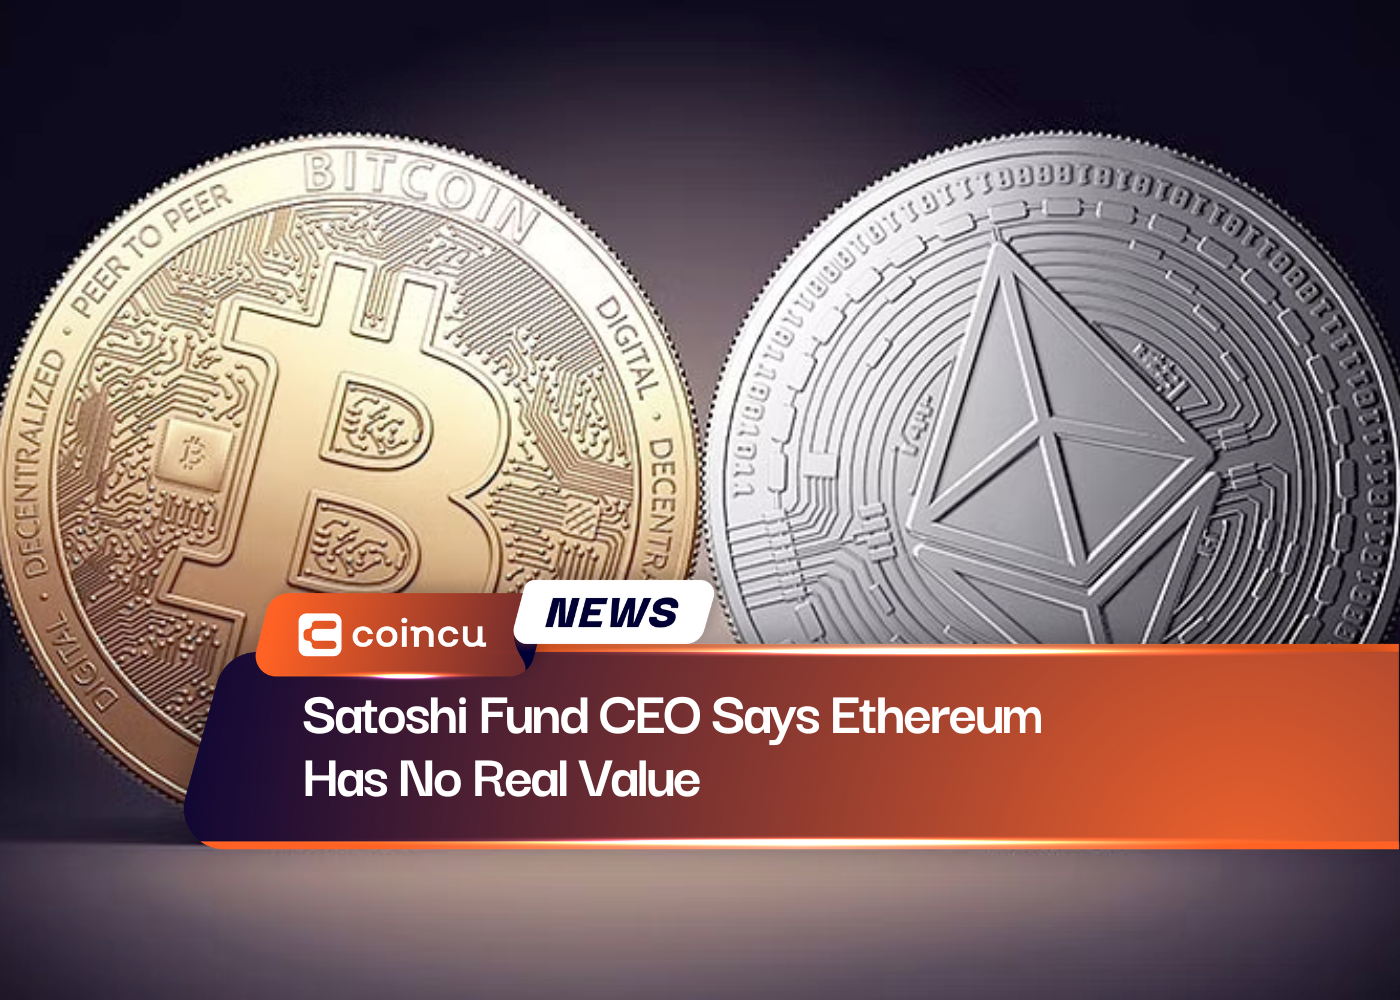 Satoshi Fund CEO Says Ethereum Has No Real Value